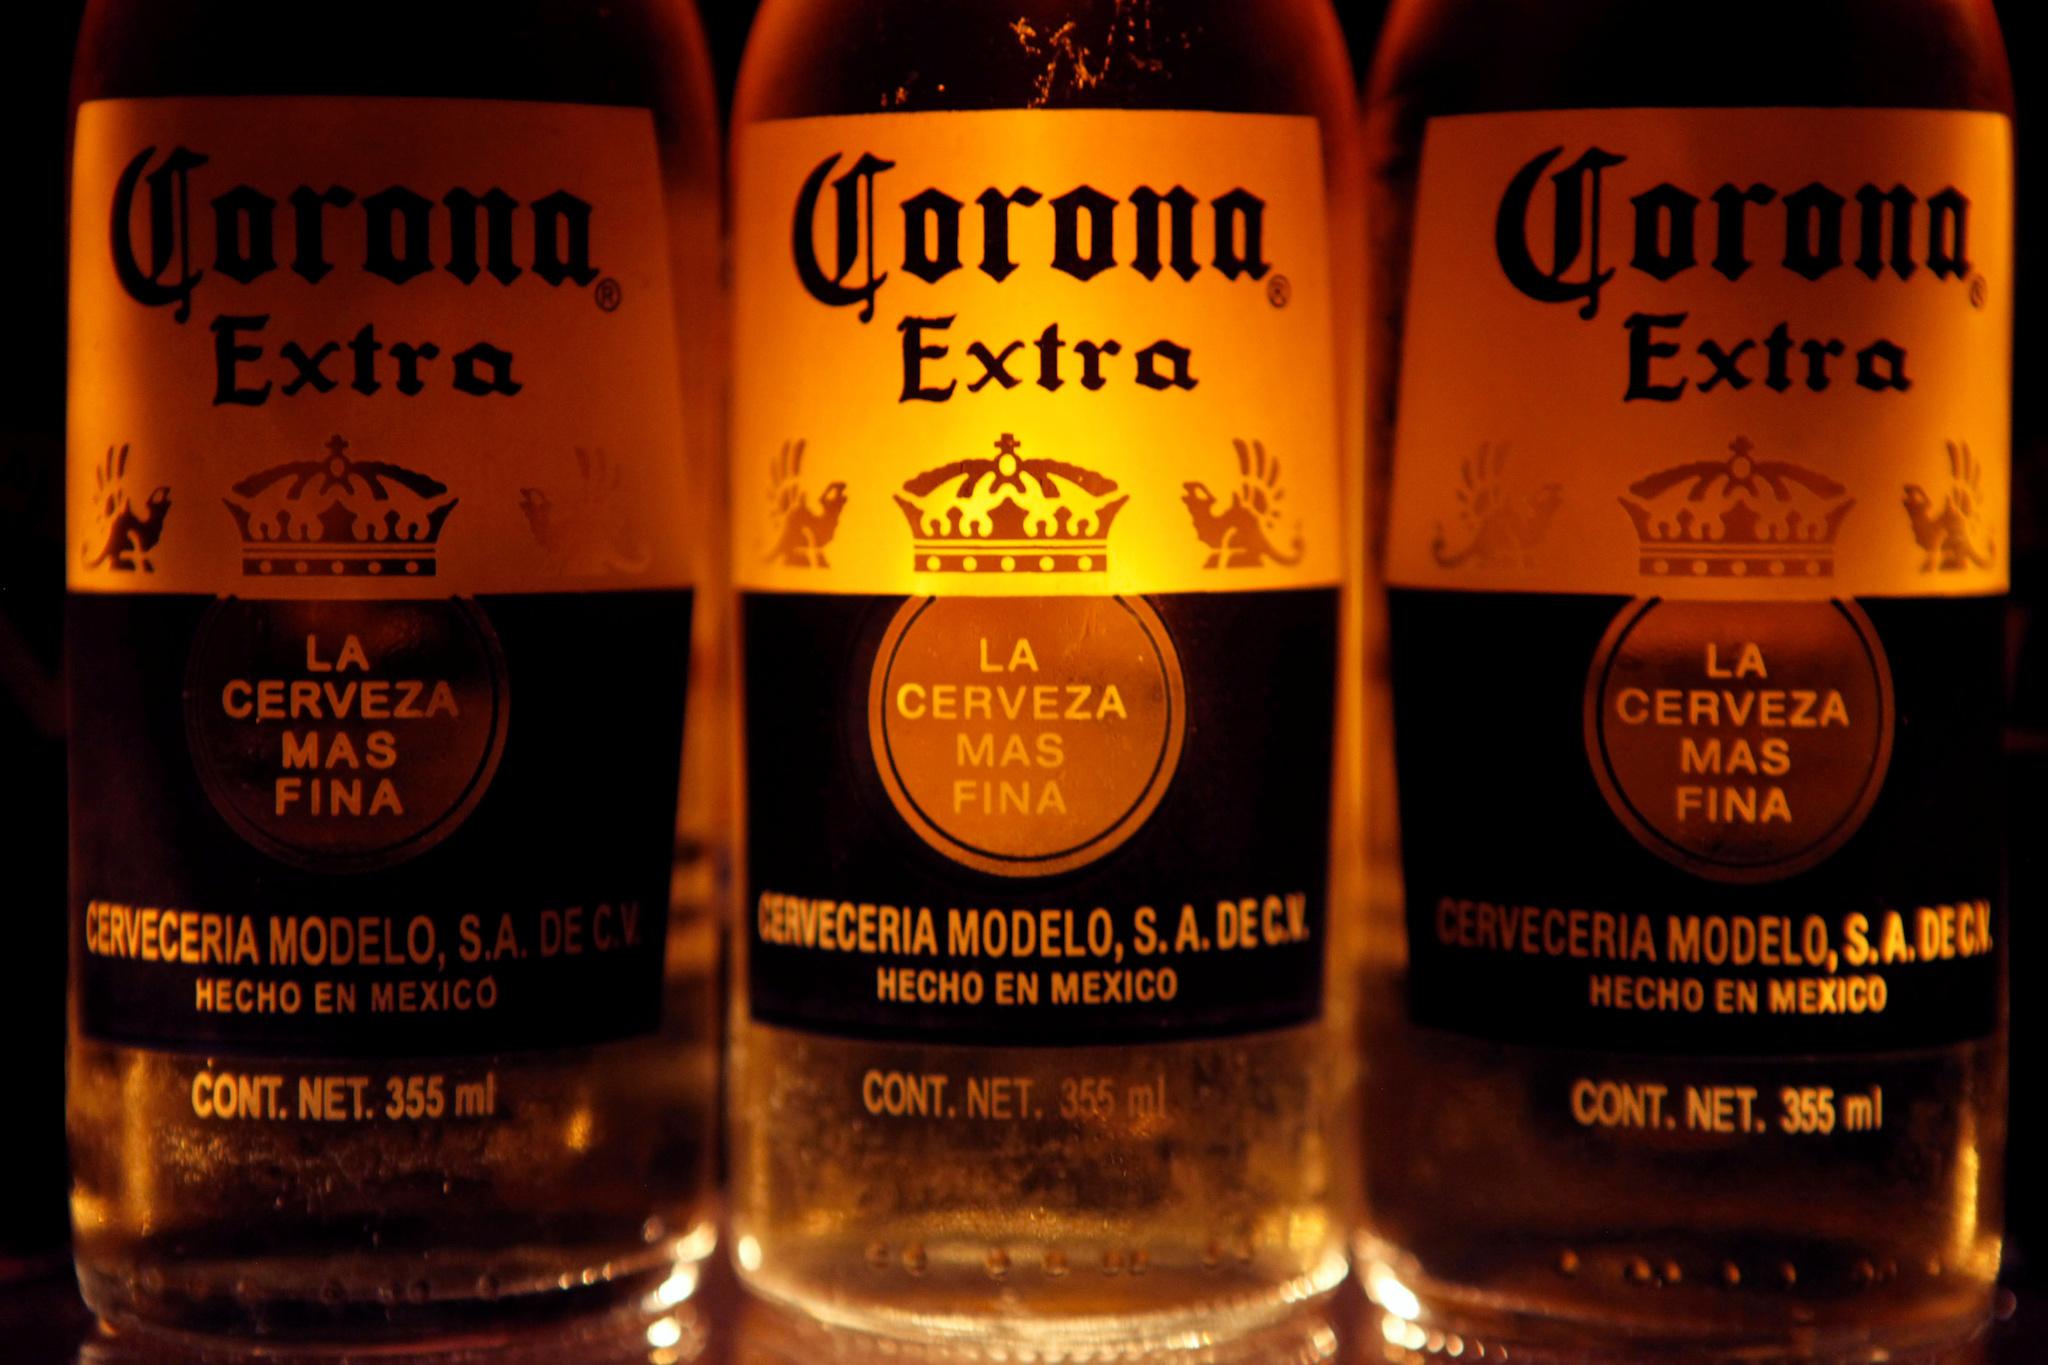 Bottles of Corona beer, the flagship brand of Group Modelo, are seen in Mexico City